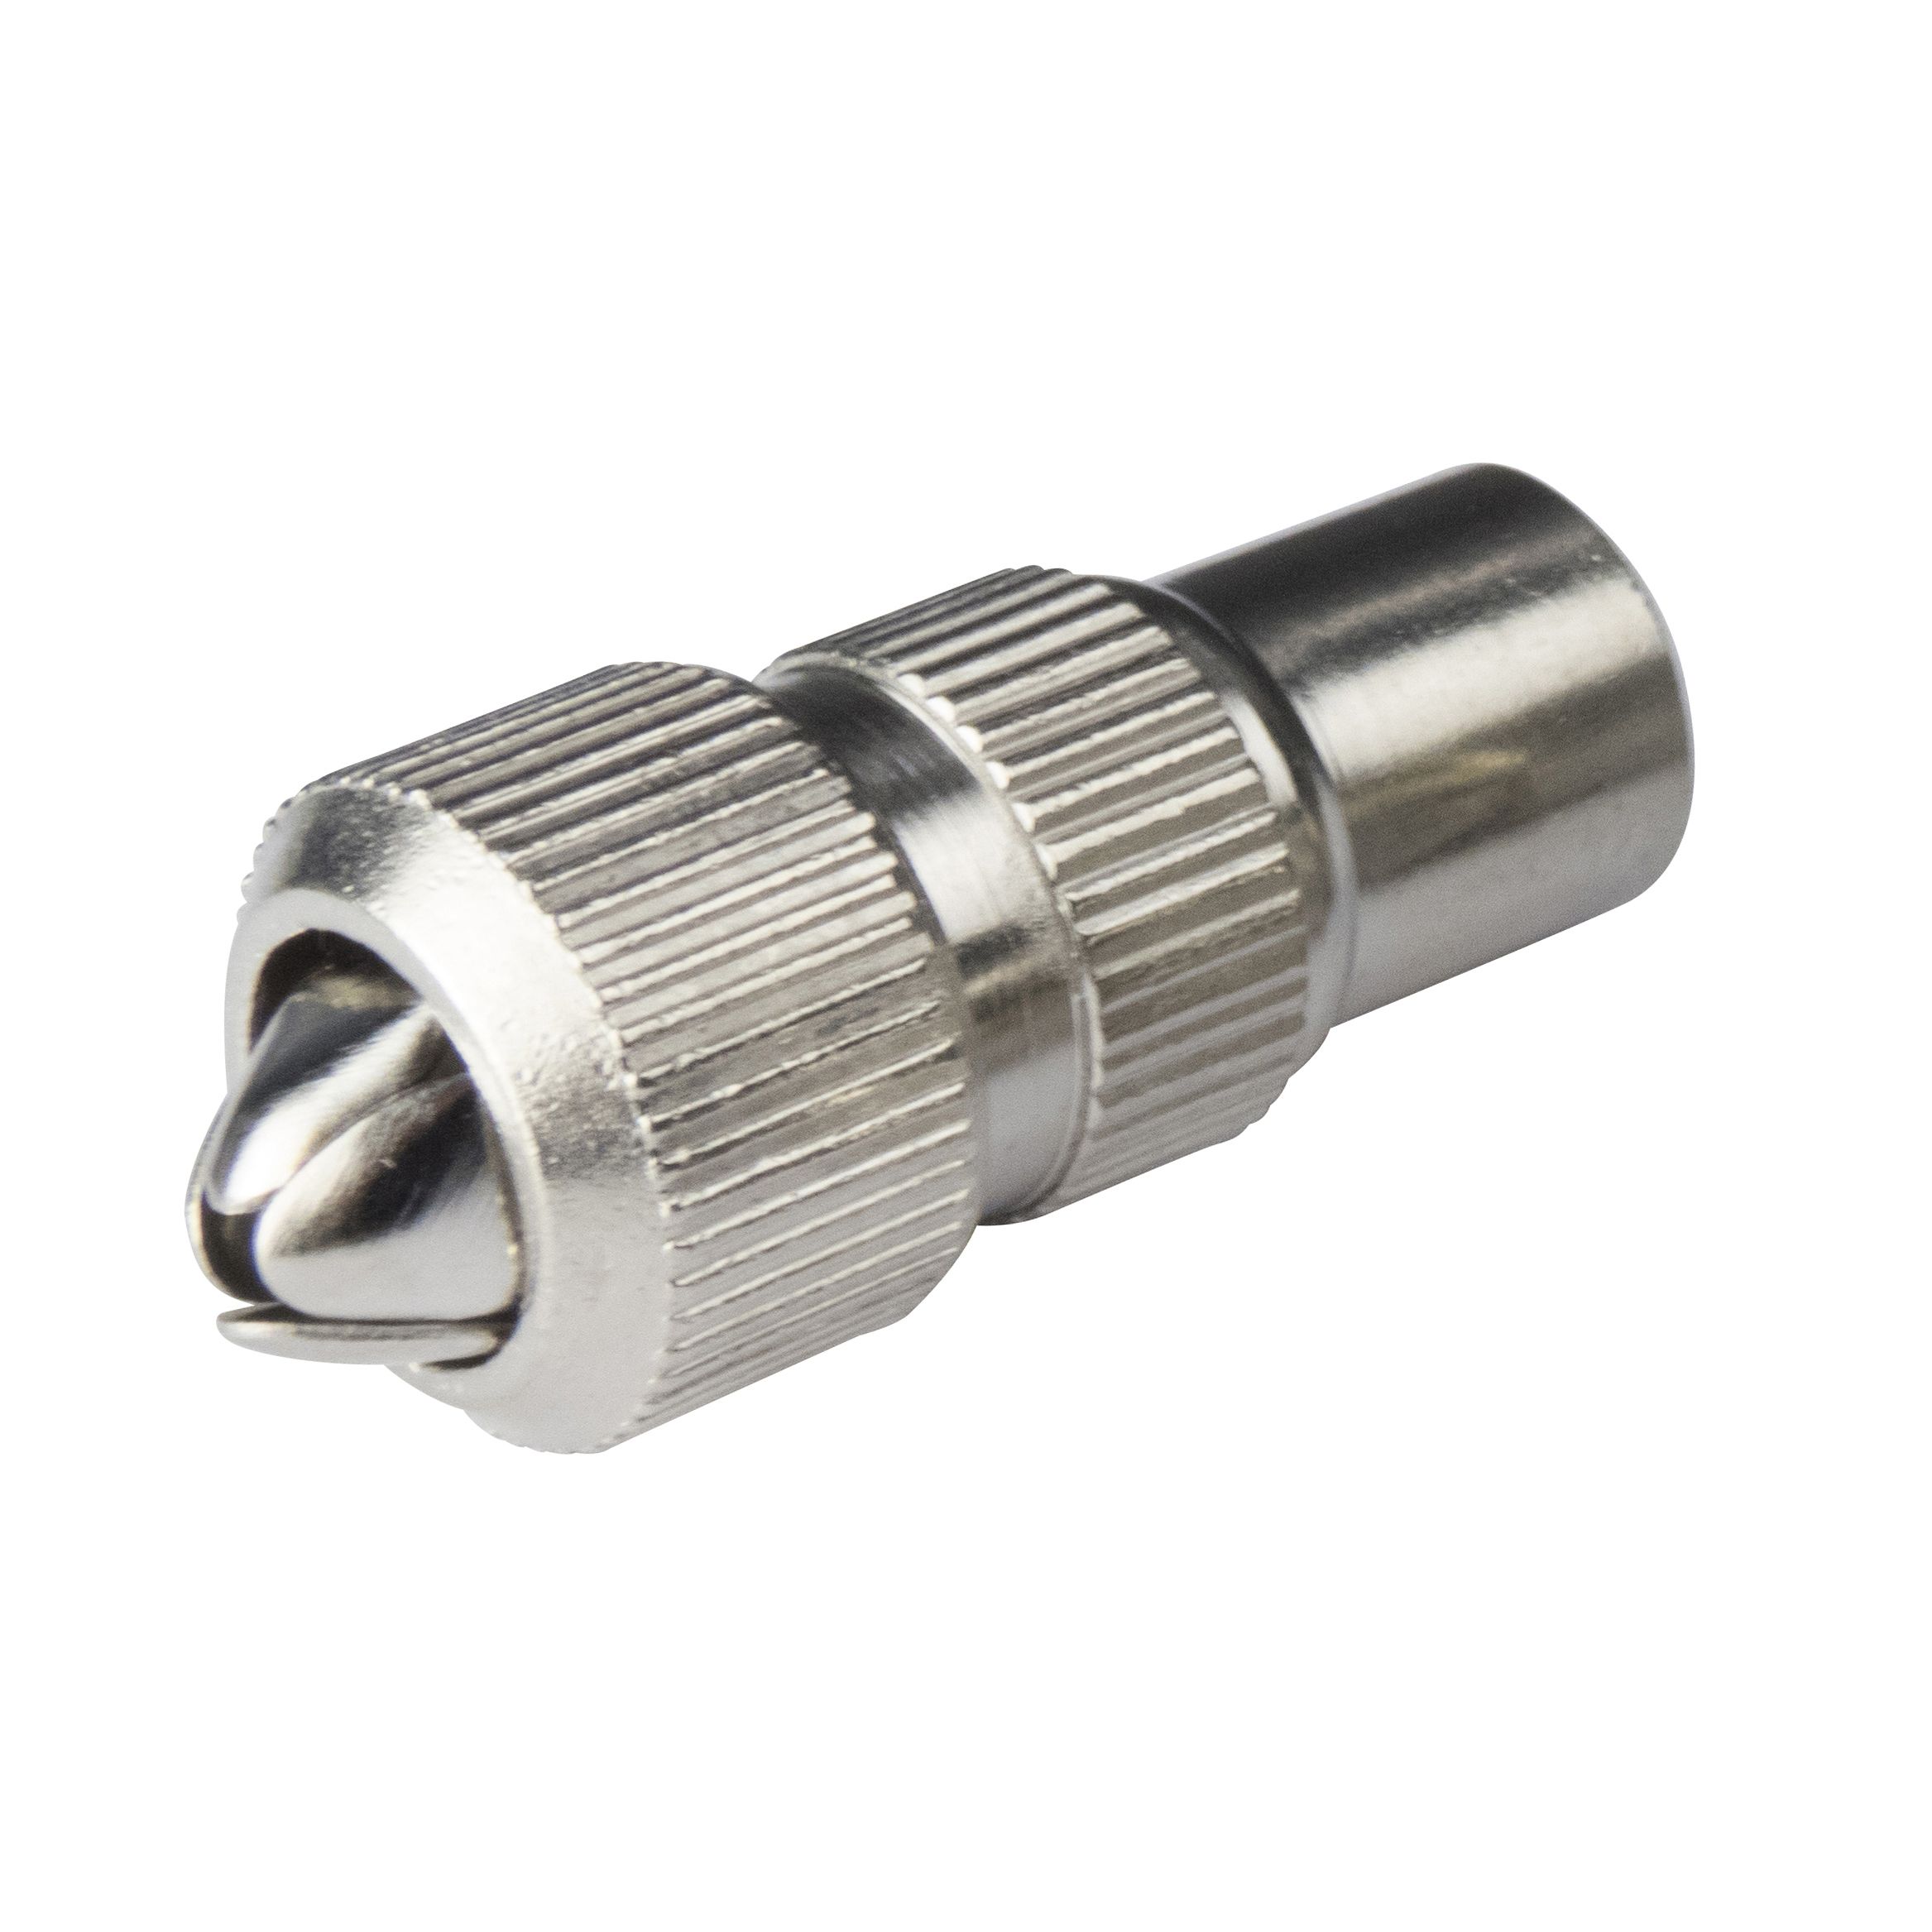 SLX Coaxial connector, Pack of 2 13mm